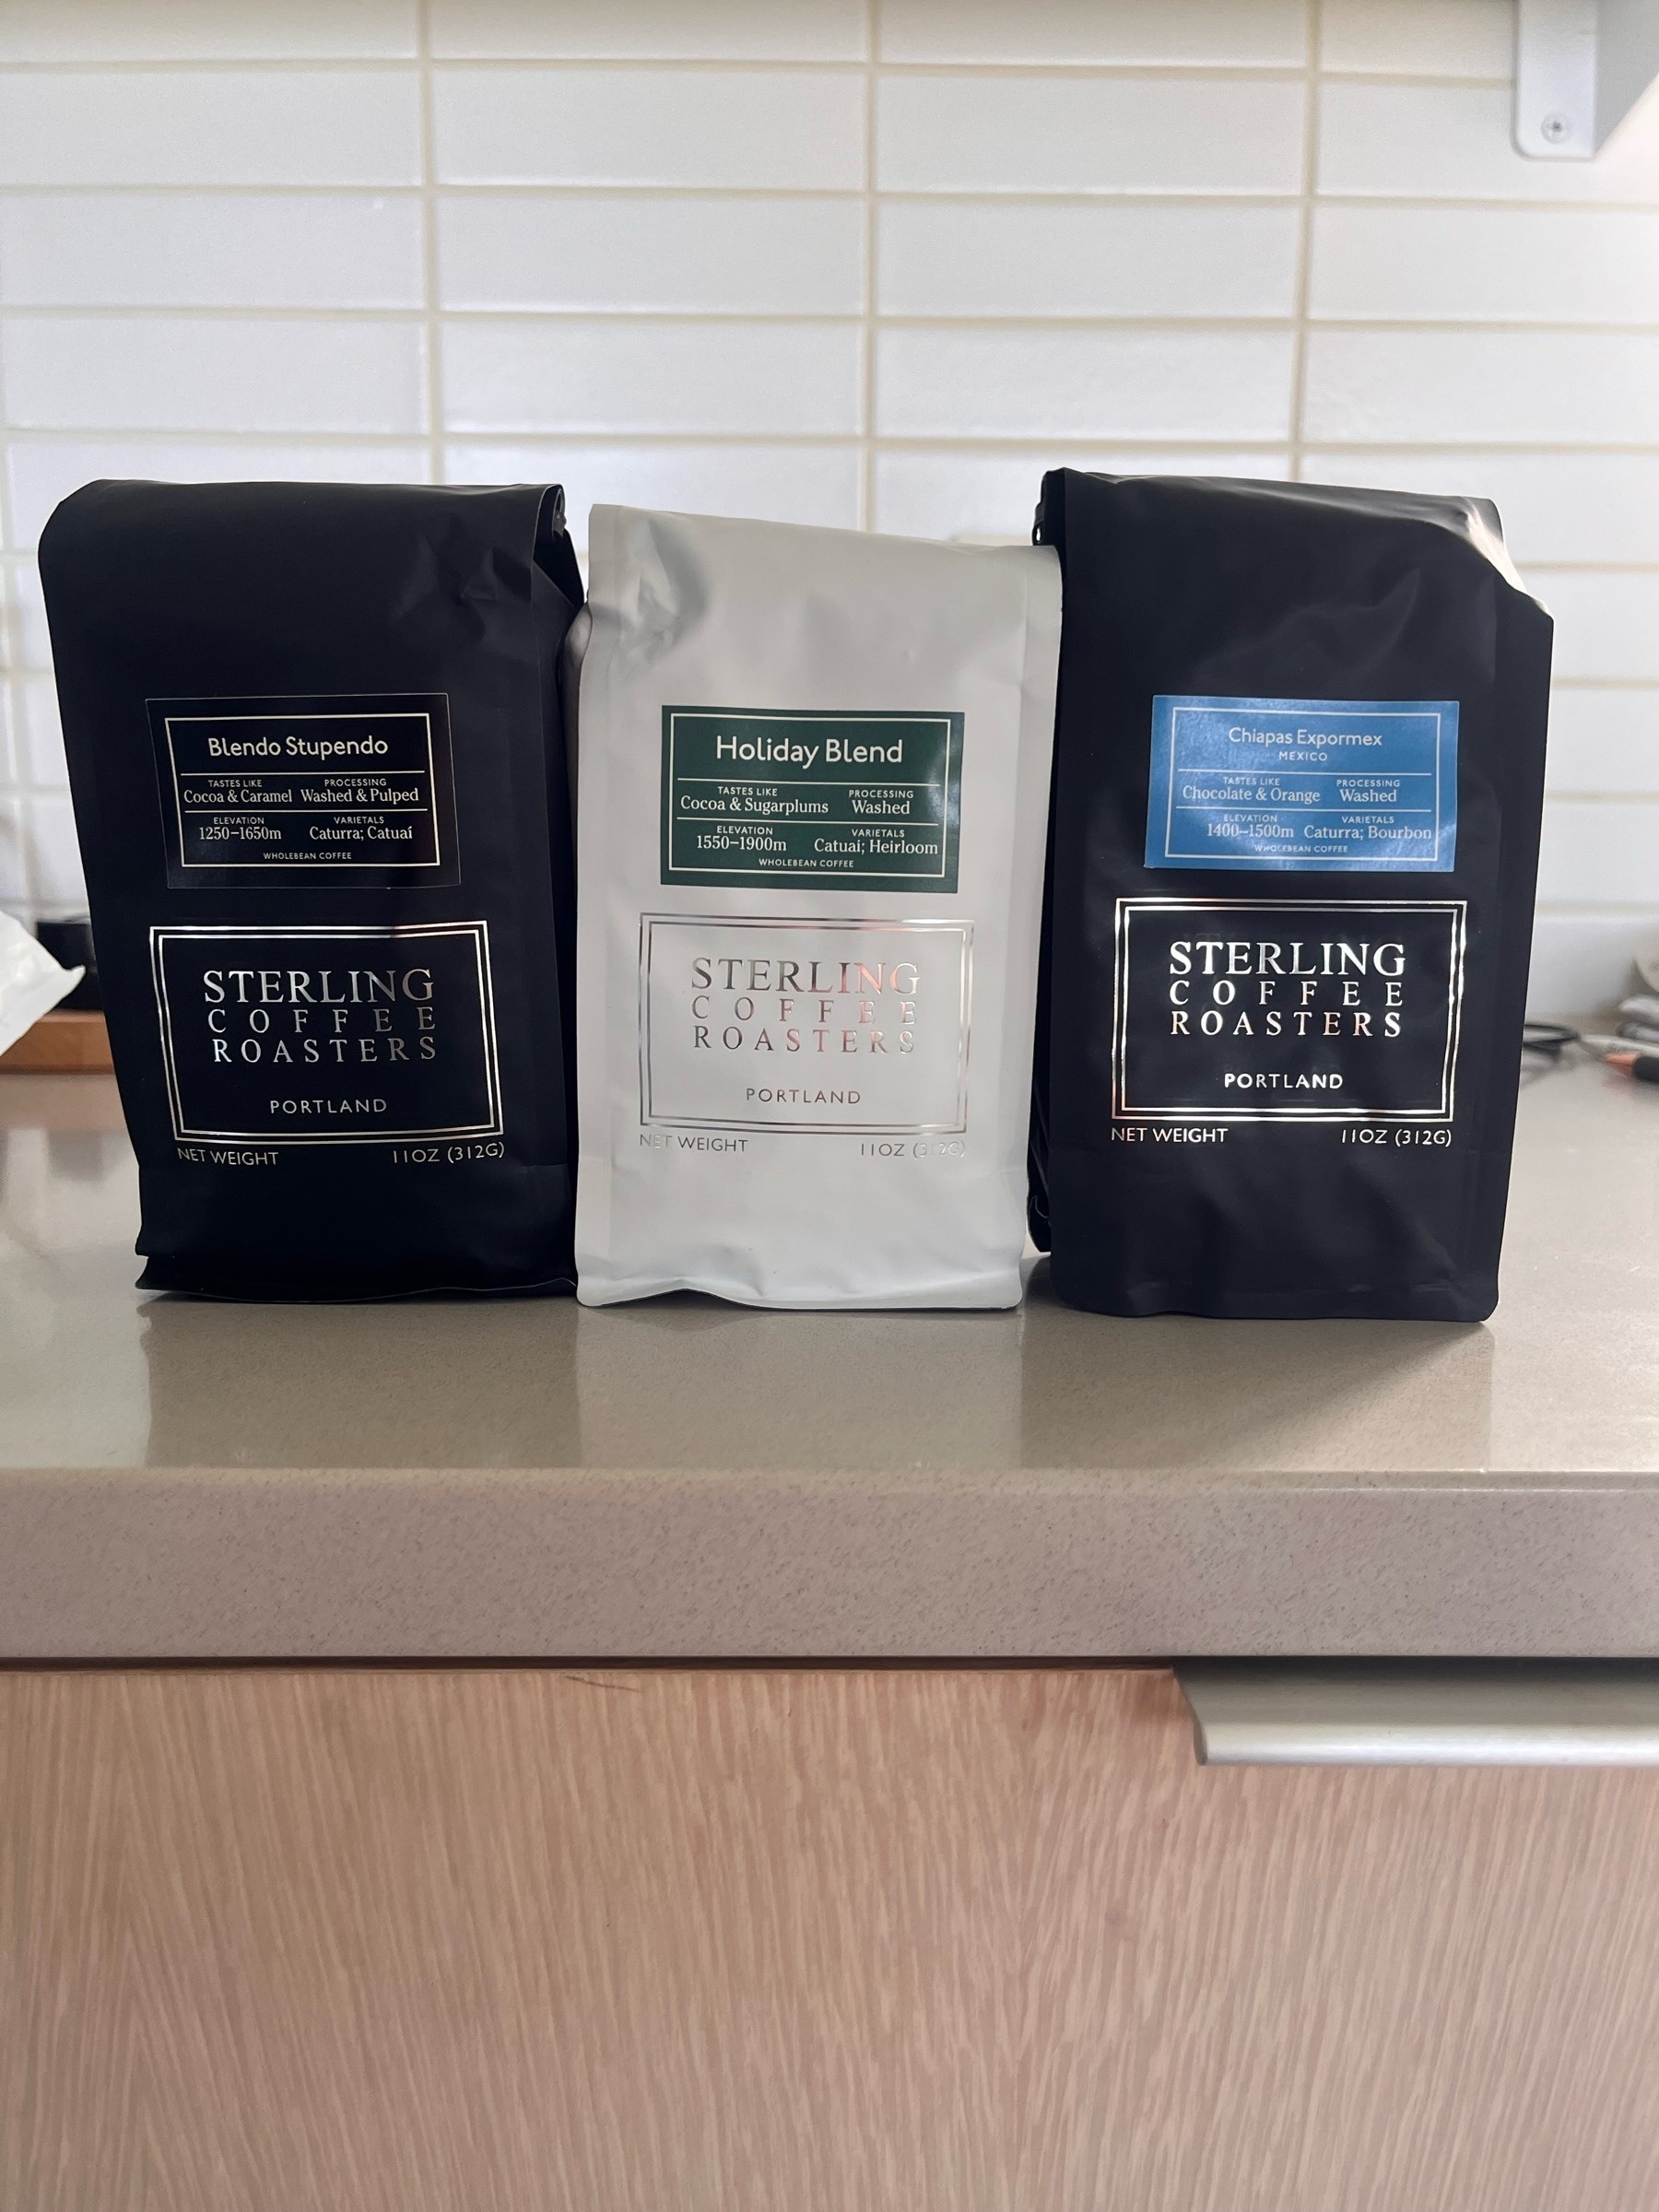 Three bags of Sterling Coffee Roasters coffee on a kitchen counter: “Blendo Stupendo,” “Holiday Blend,” and “Chiapas Eupromex.” The bags are labeled with flavor notes, processing methods, and elevation of the coffee beans